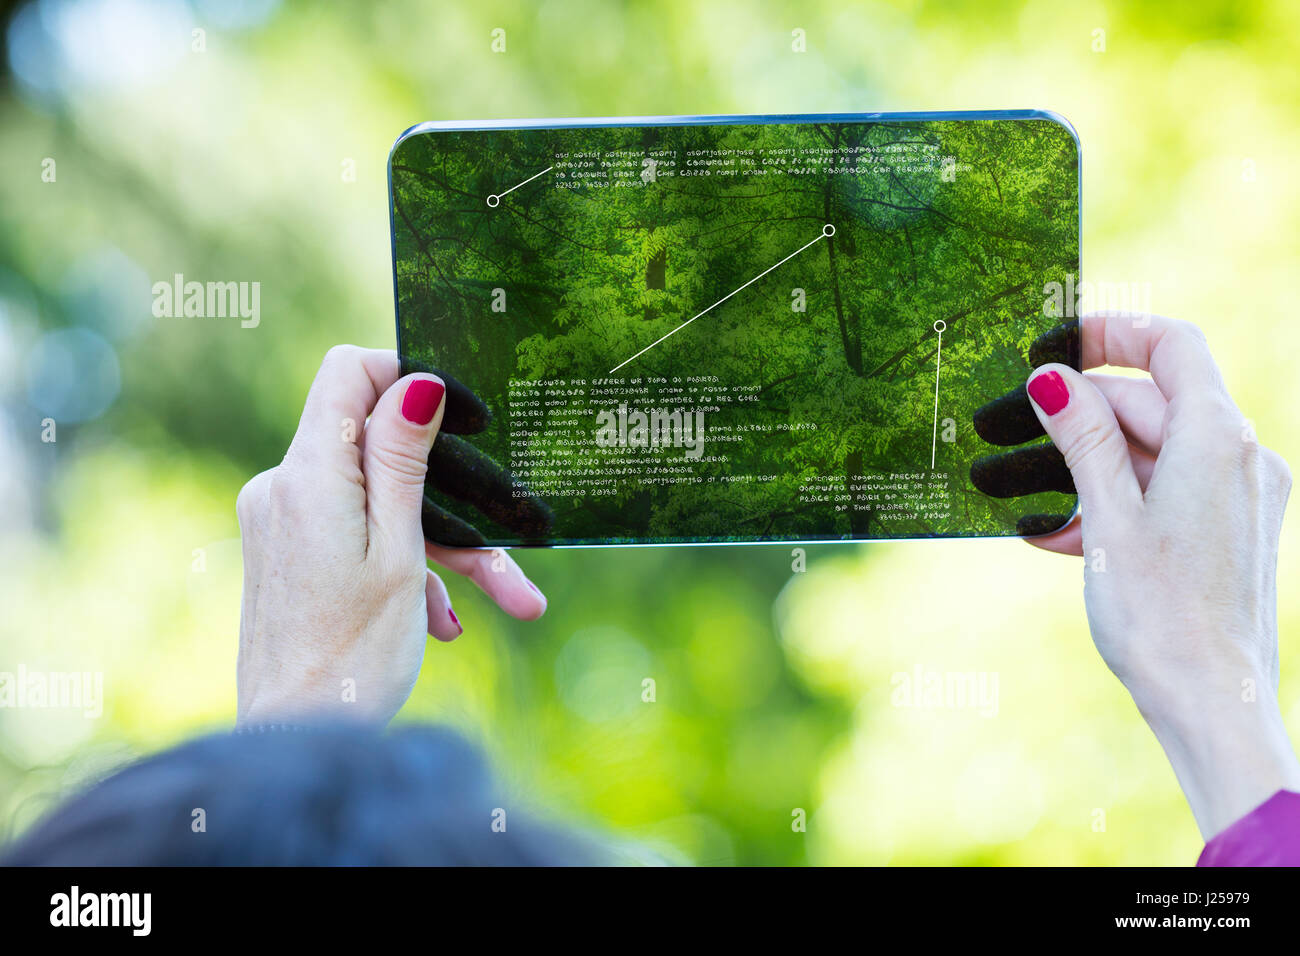 hands of a woman, concept of tourist using augmented reality on a high tech transparent digital tablet Stock Photo